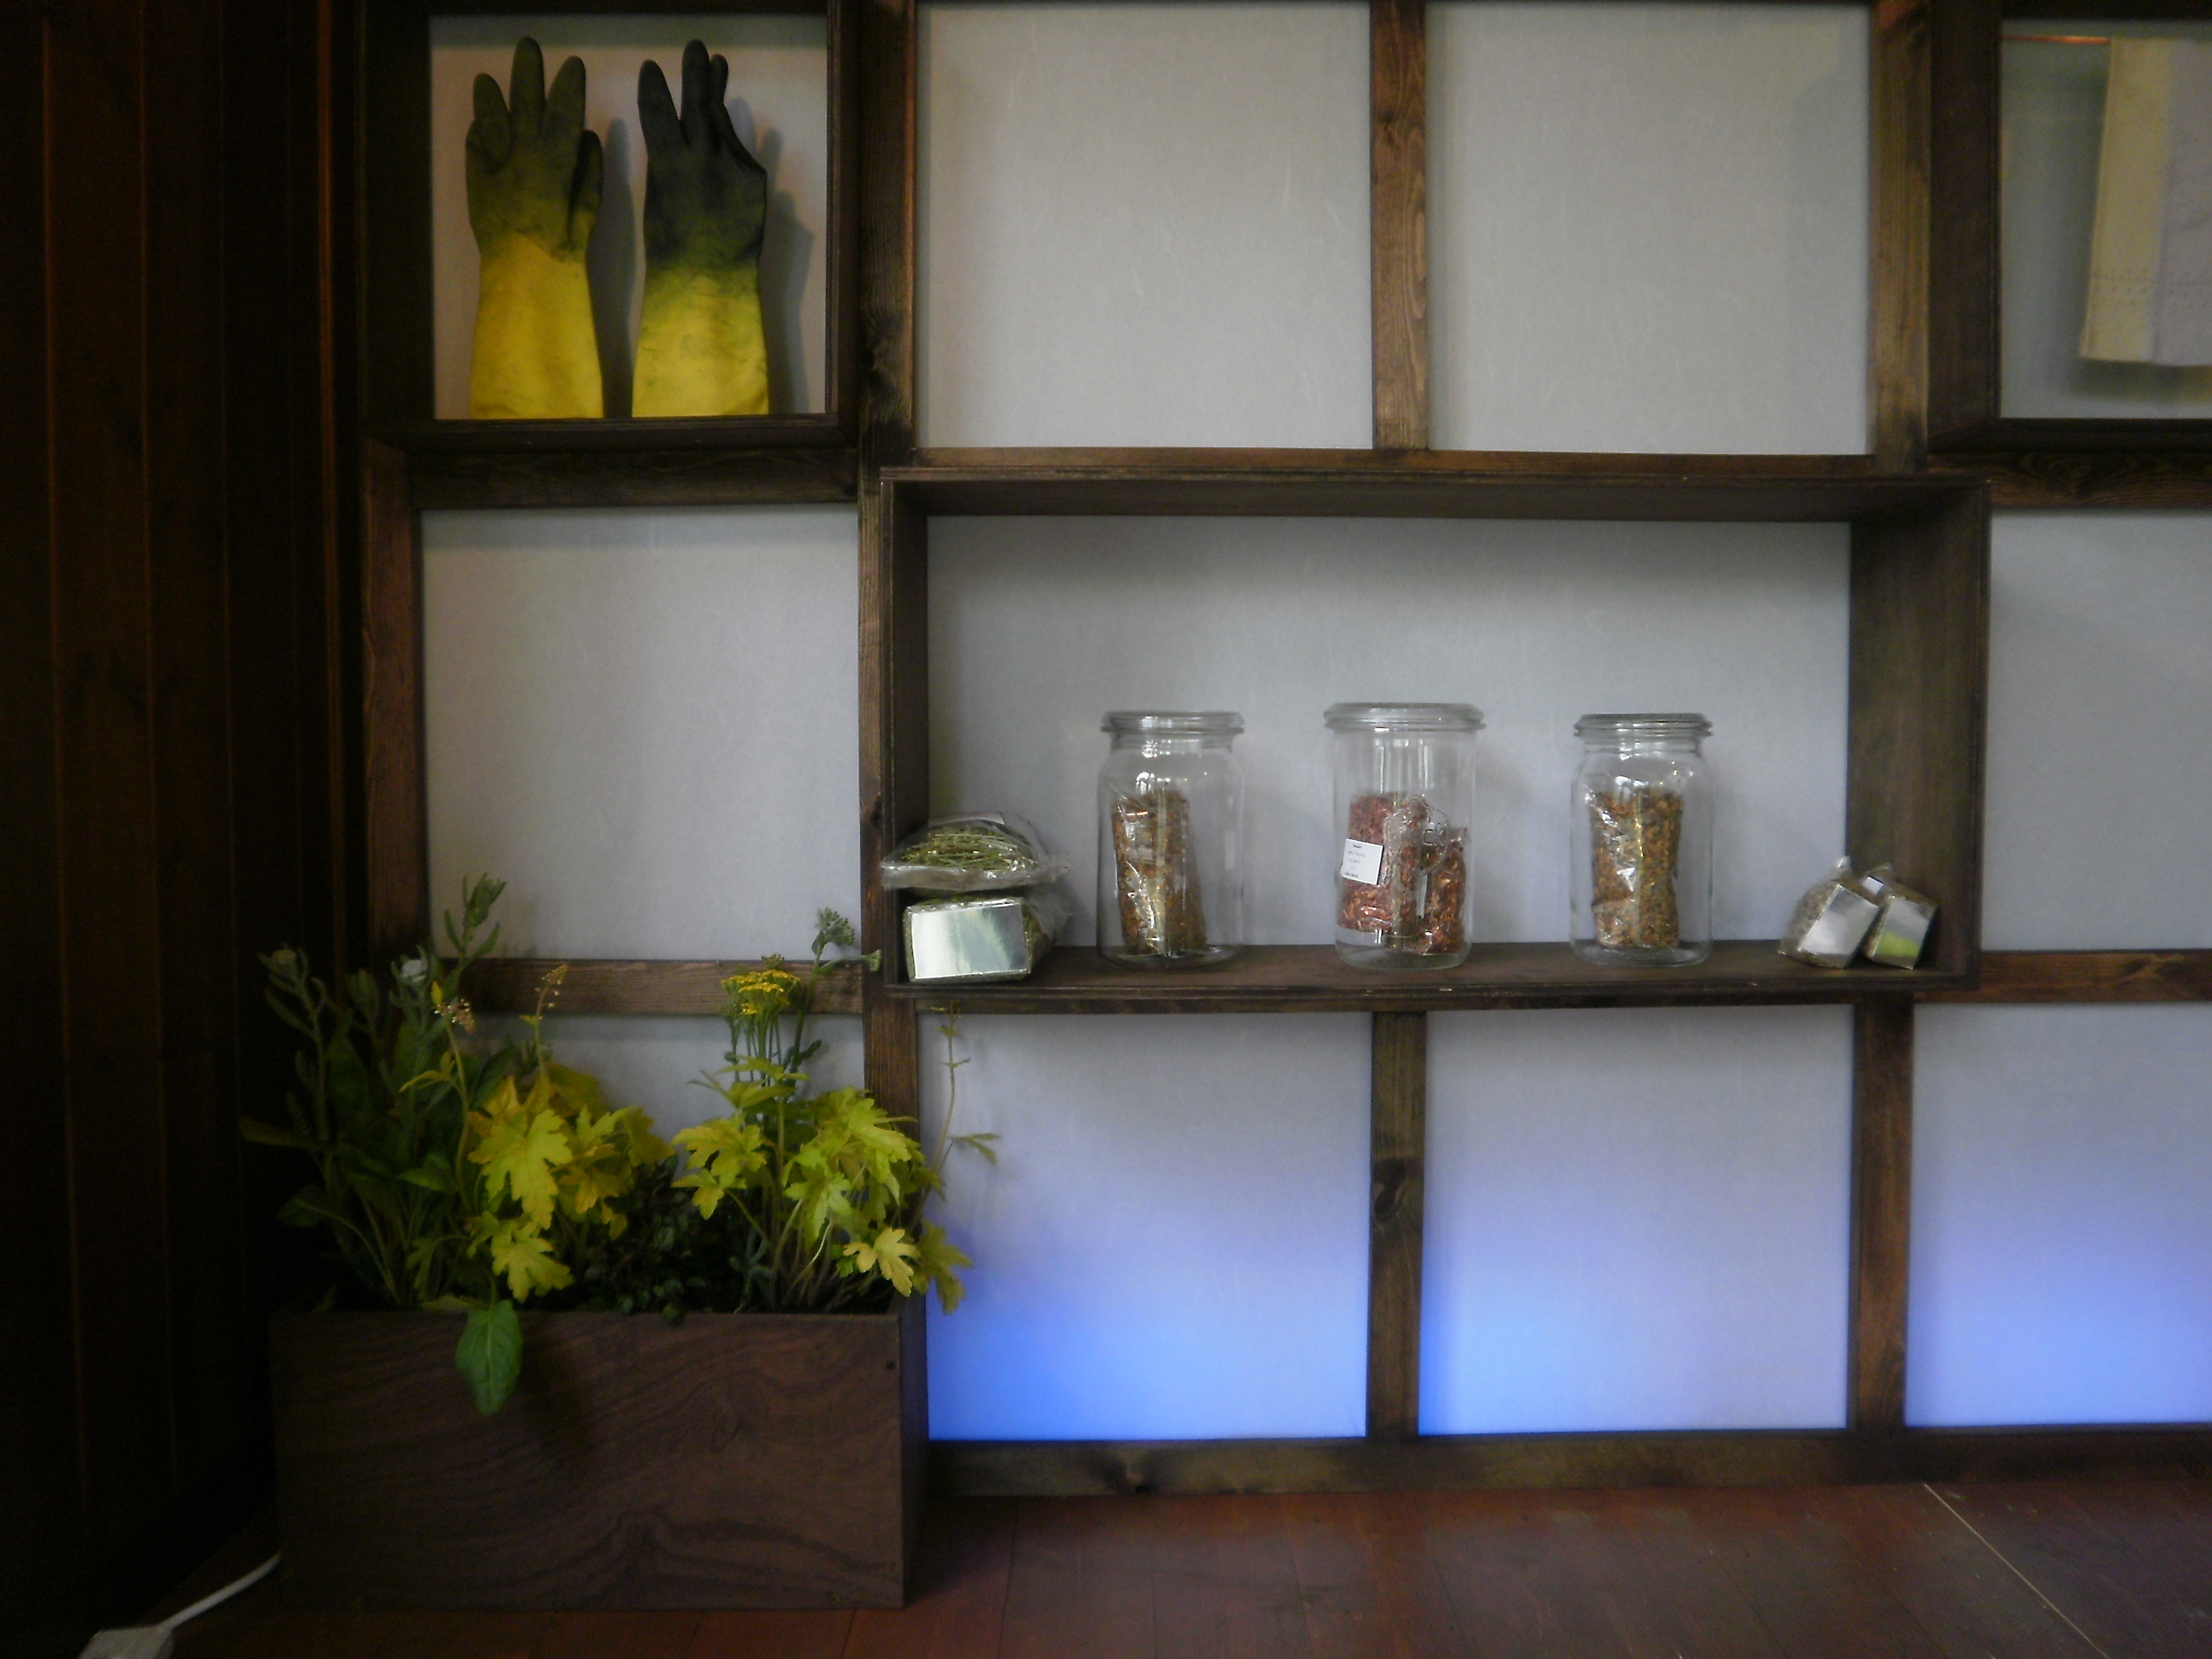 The interior of the Artisan Retreat showcases the eco-dye process. Here are plants, gloves used in the dye process and dried plants stored in jars.